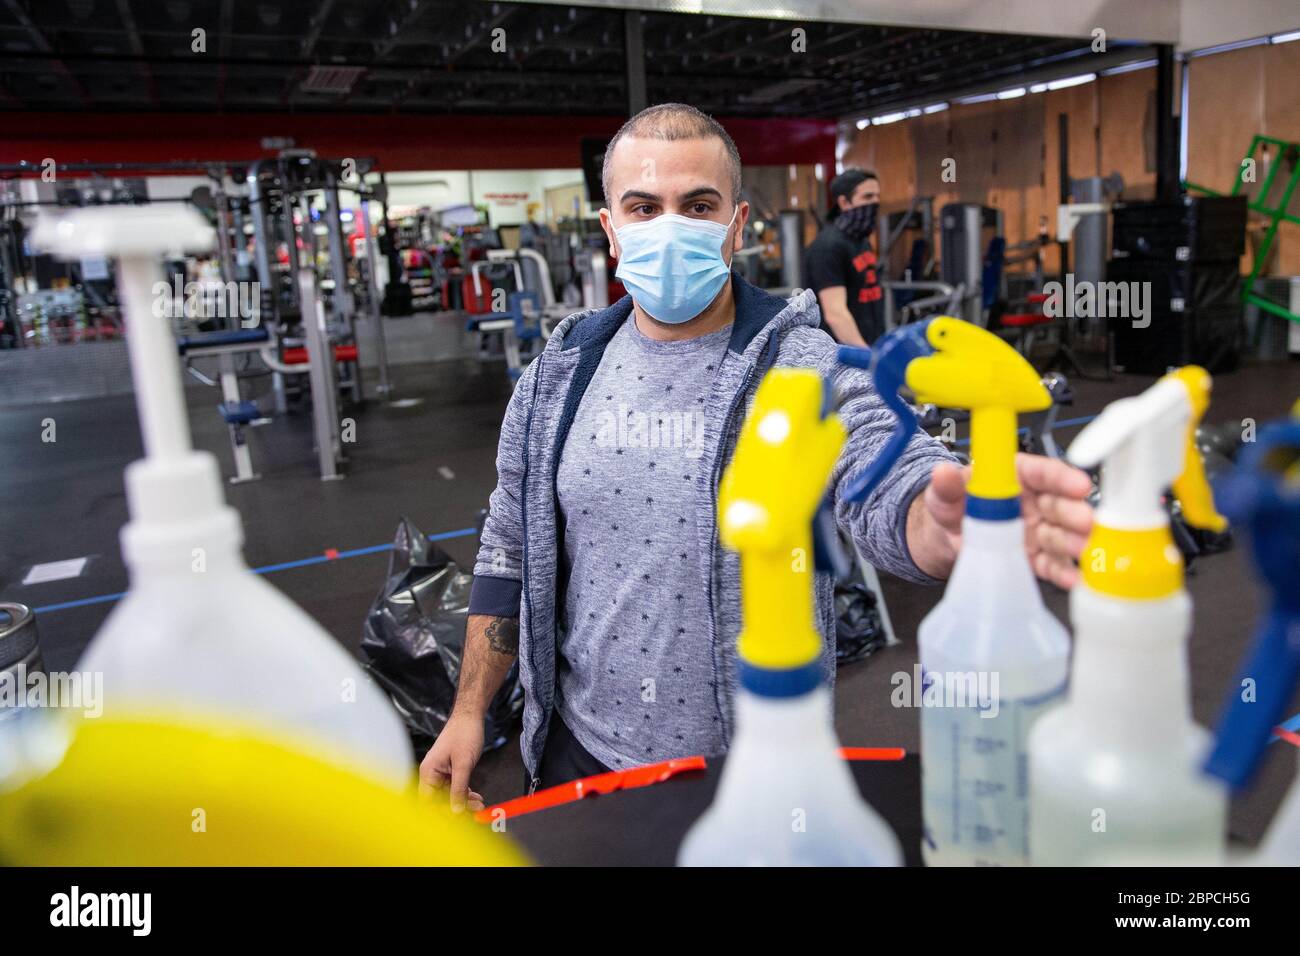 Bellmawr, New Jersey, USA. 18th May, 2020. A member of the gym picks up a bottle of disinfectant upon entry into the Atilis Gym in Bellmawr, NJ, on Monday, May 18, 2020. Every member is issued a bottle of disinfectant to clean equipment both before and after use as required by Atilis Gym in their new rules. Credit: Dave Hernandez/ZUMA Wire/Alamy Live News Stock Photo